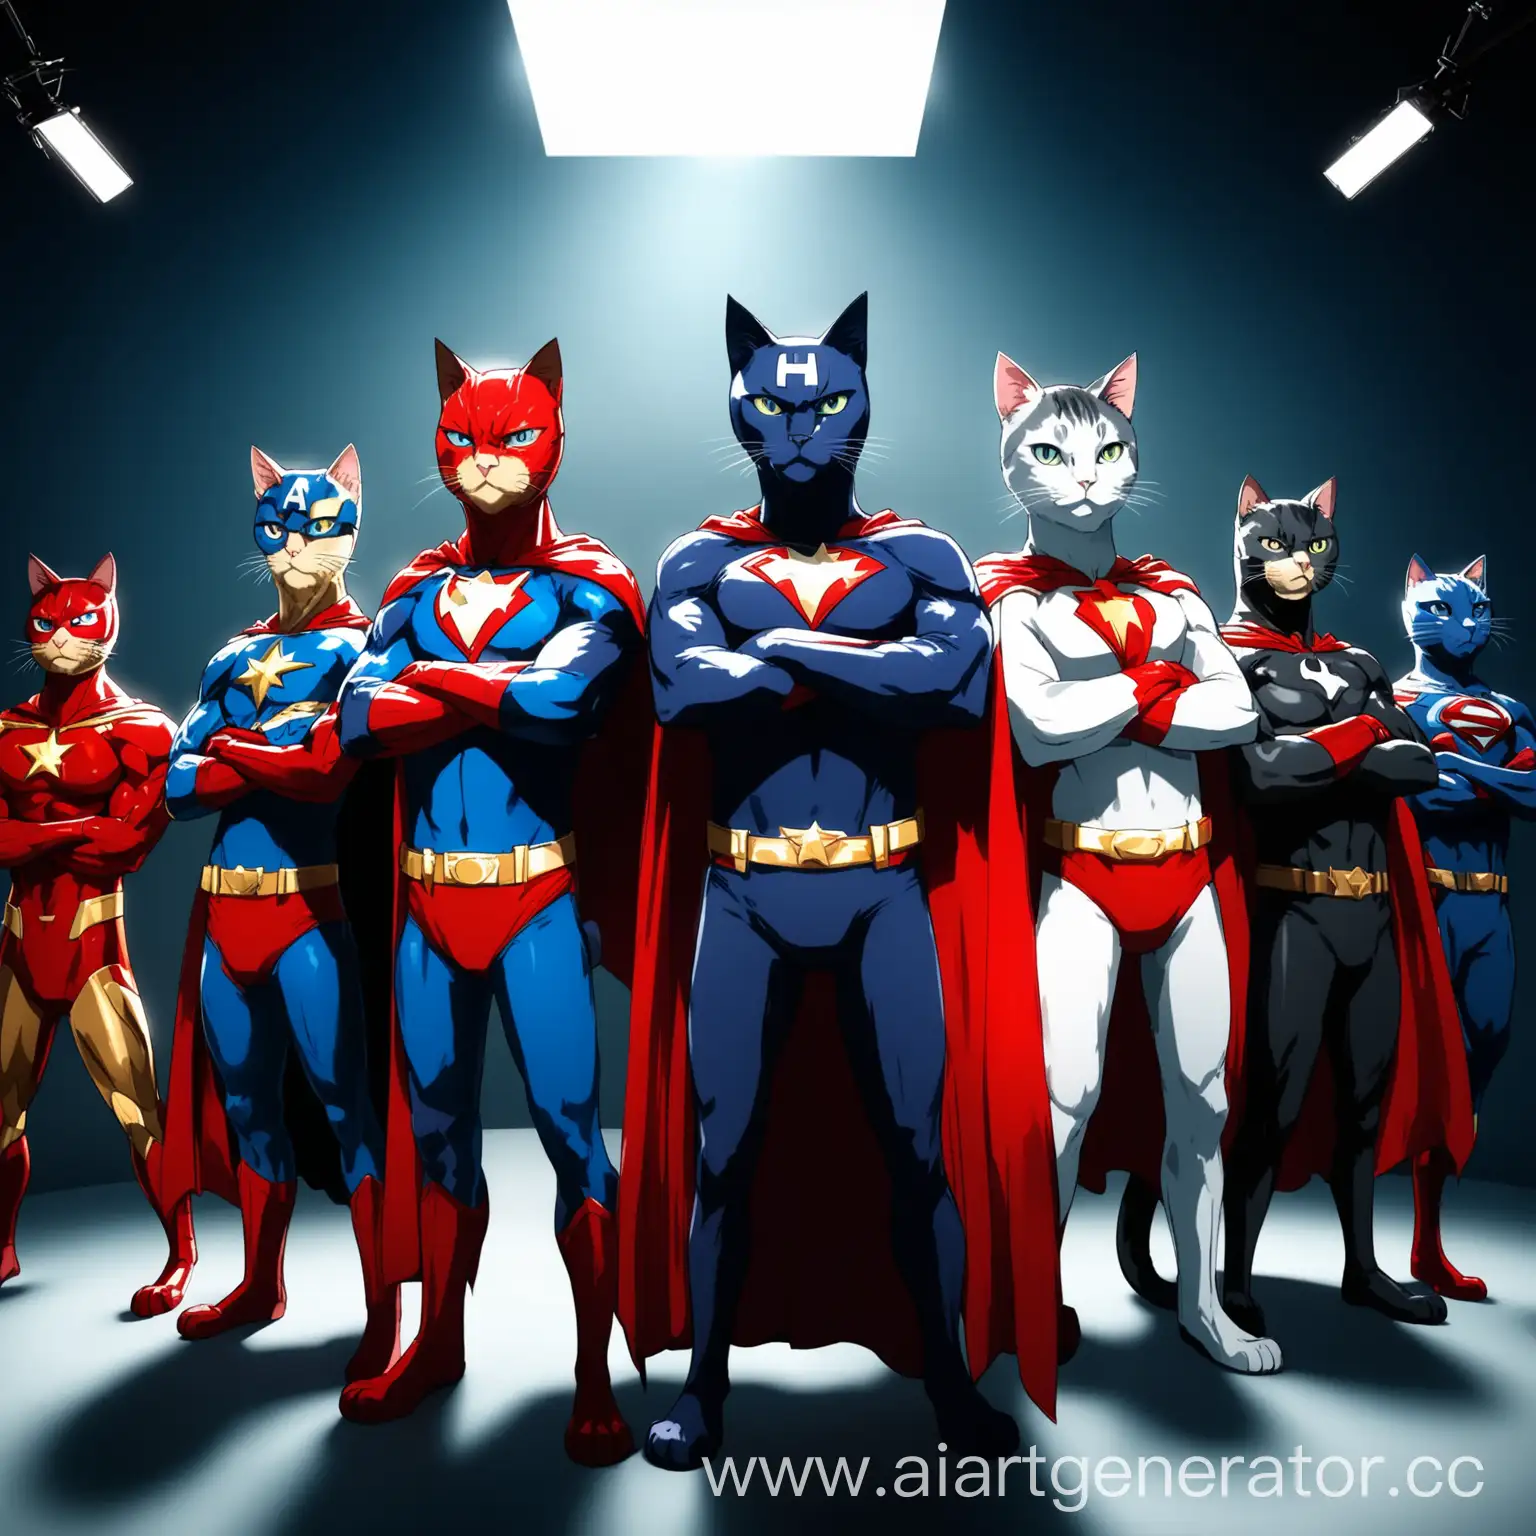 Anime-Cats-Superheroes-Standing-with-Arms-Crossed-in-Studio